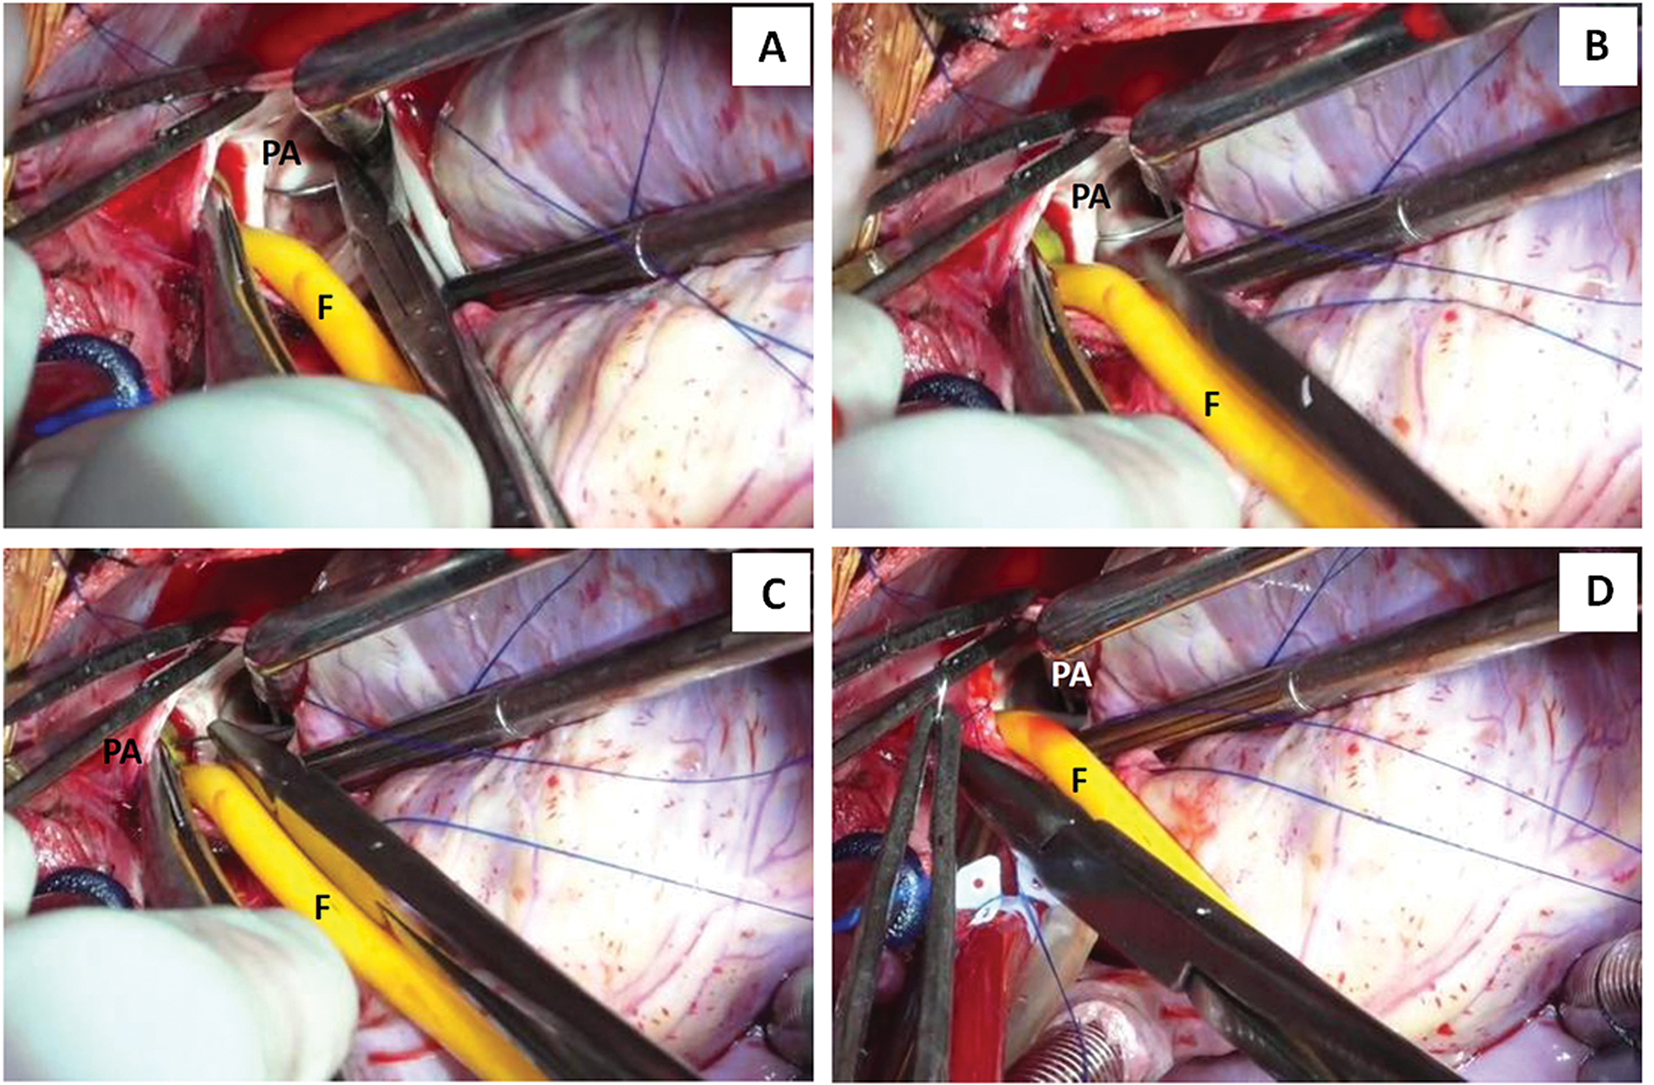 (A–D) Surgical photographs showing step-by-step transpulmonary ductal closure under normothermic cardiopulmonary bypass and cardioplegic arrest. The aorta was individually cross-clamped. After cardioplegic arrest the pulmonary trunk was transversely opened in between stay sutures. The pump flows were transiently lowered to identify the pulmonary arterial end of the ductal orifice. A 20-Fr Foley catheter was inserted through the ductal orifice into the aorta. The ductal orifice was closed using multiple interrupted 4-0polypropylene suture buttressed with Teflon pledgets. The Foley catheter was advanced little deep within the aorta to avoid balloon rupture during suture placement. The balloon subsequently was deflated and withdrawn.